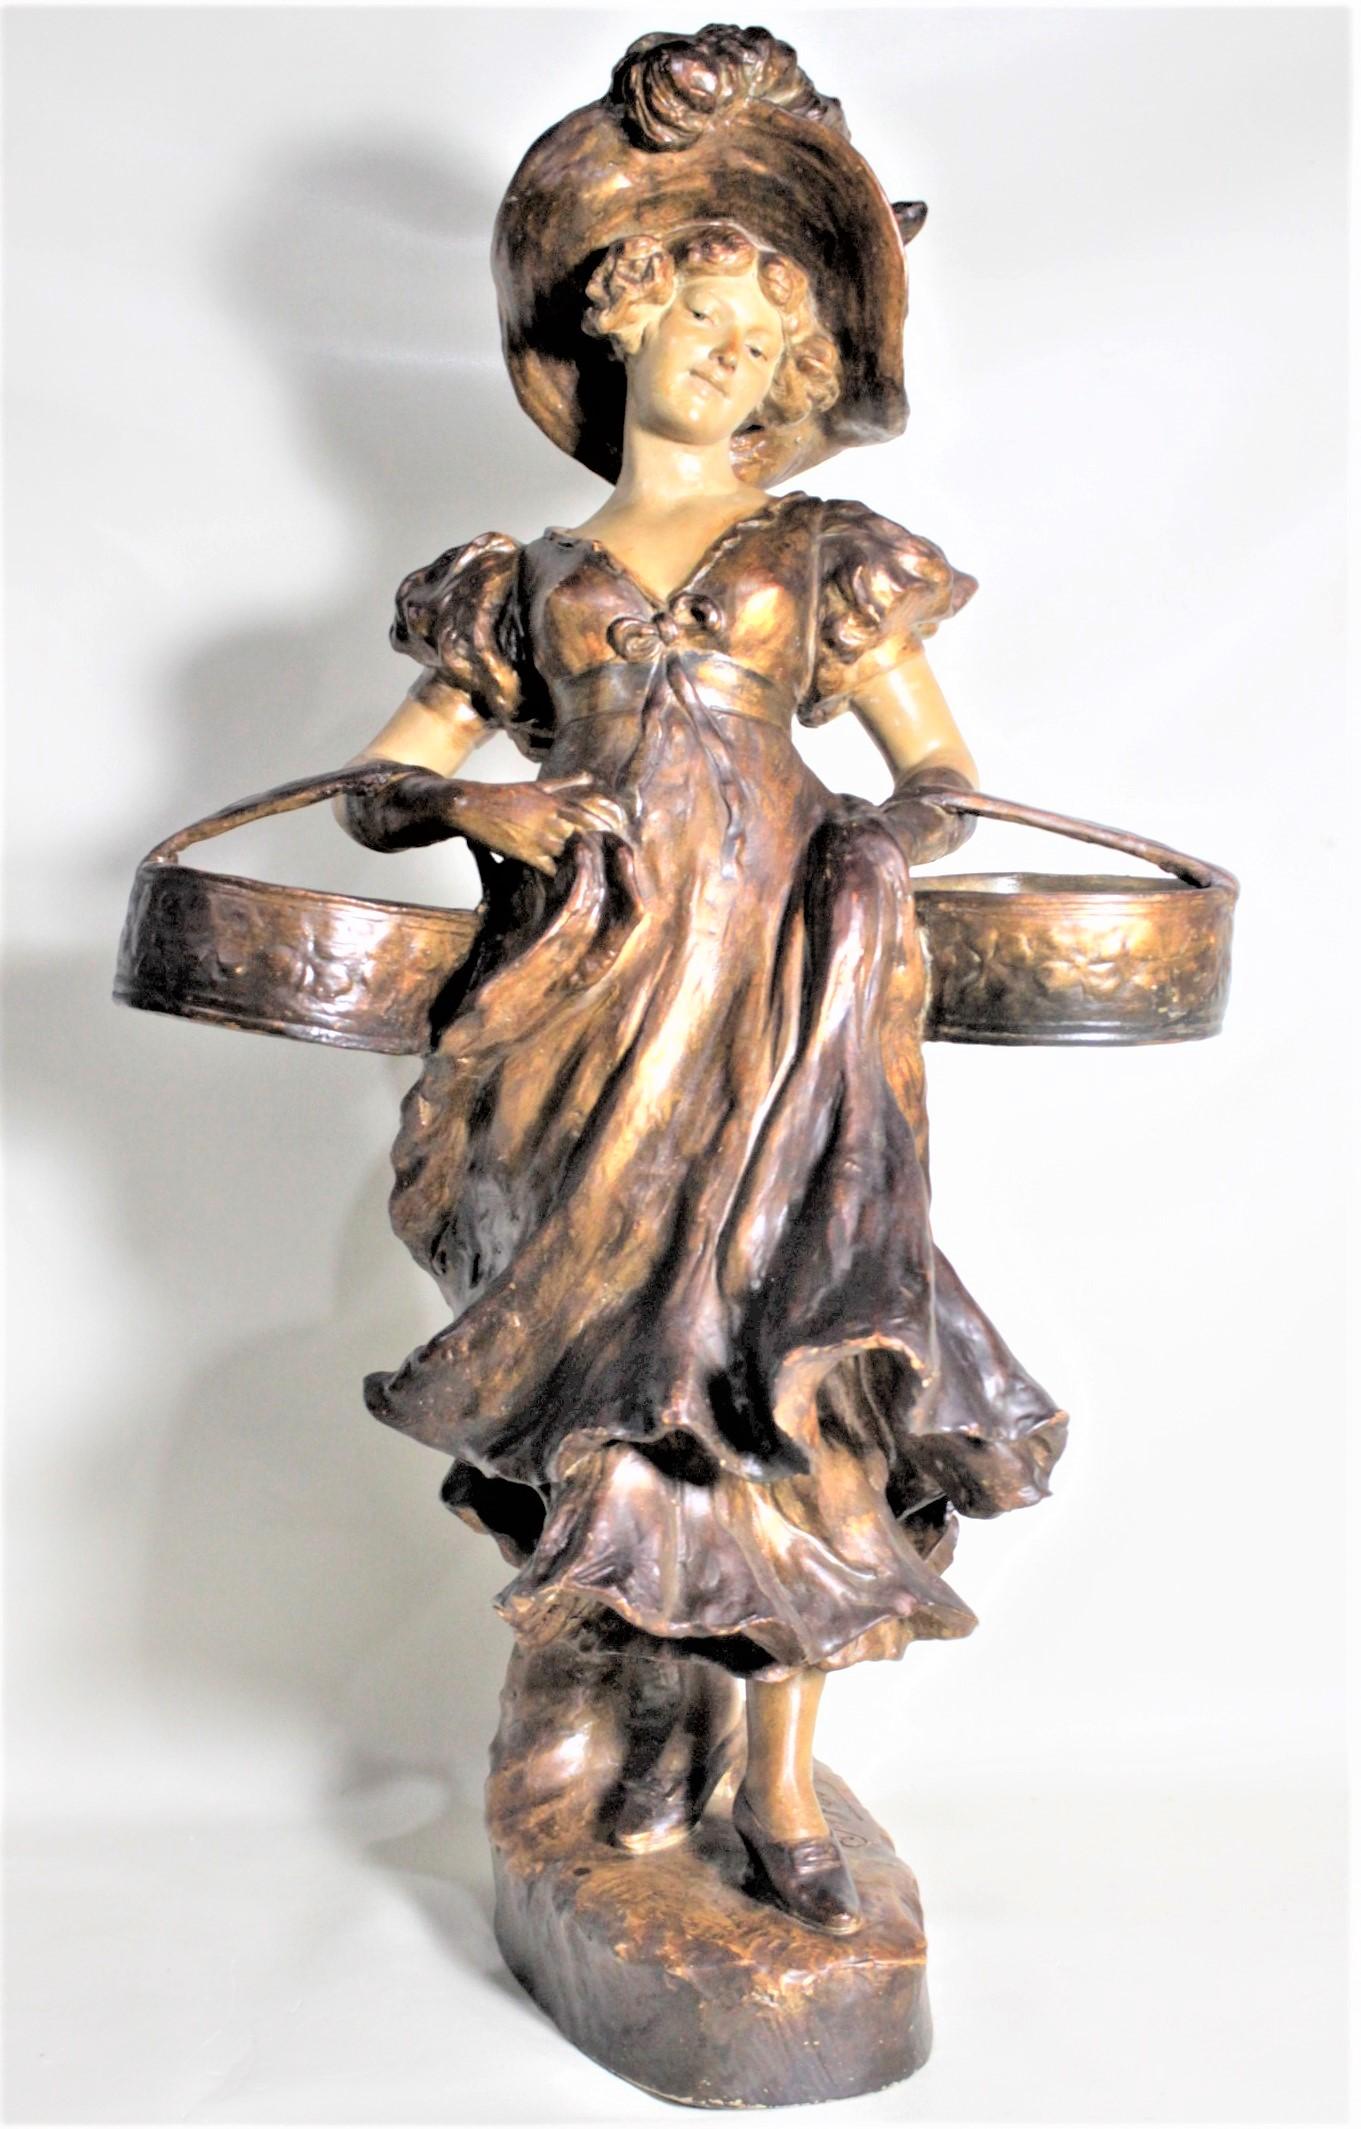 This glazed earthenware sculpture was done by the German sculptor, Otto Petri in the period Art Nouveau style. This sculpture is a very detailed depiction of a young woman with a flowing dress and hat, carrying two baskets, possibly to market. The